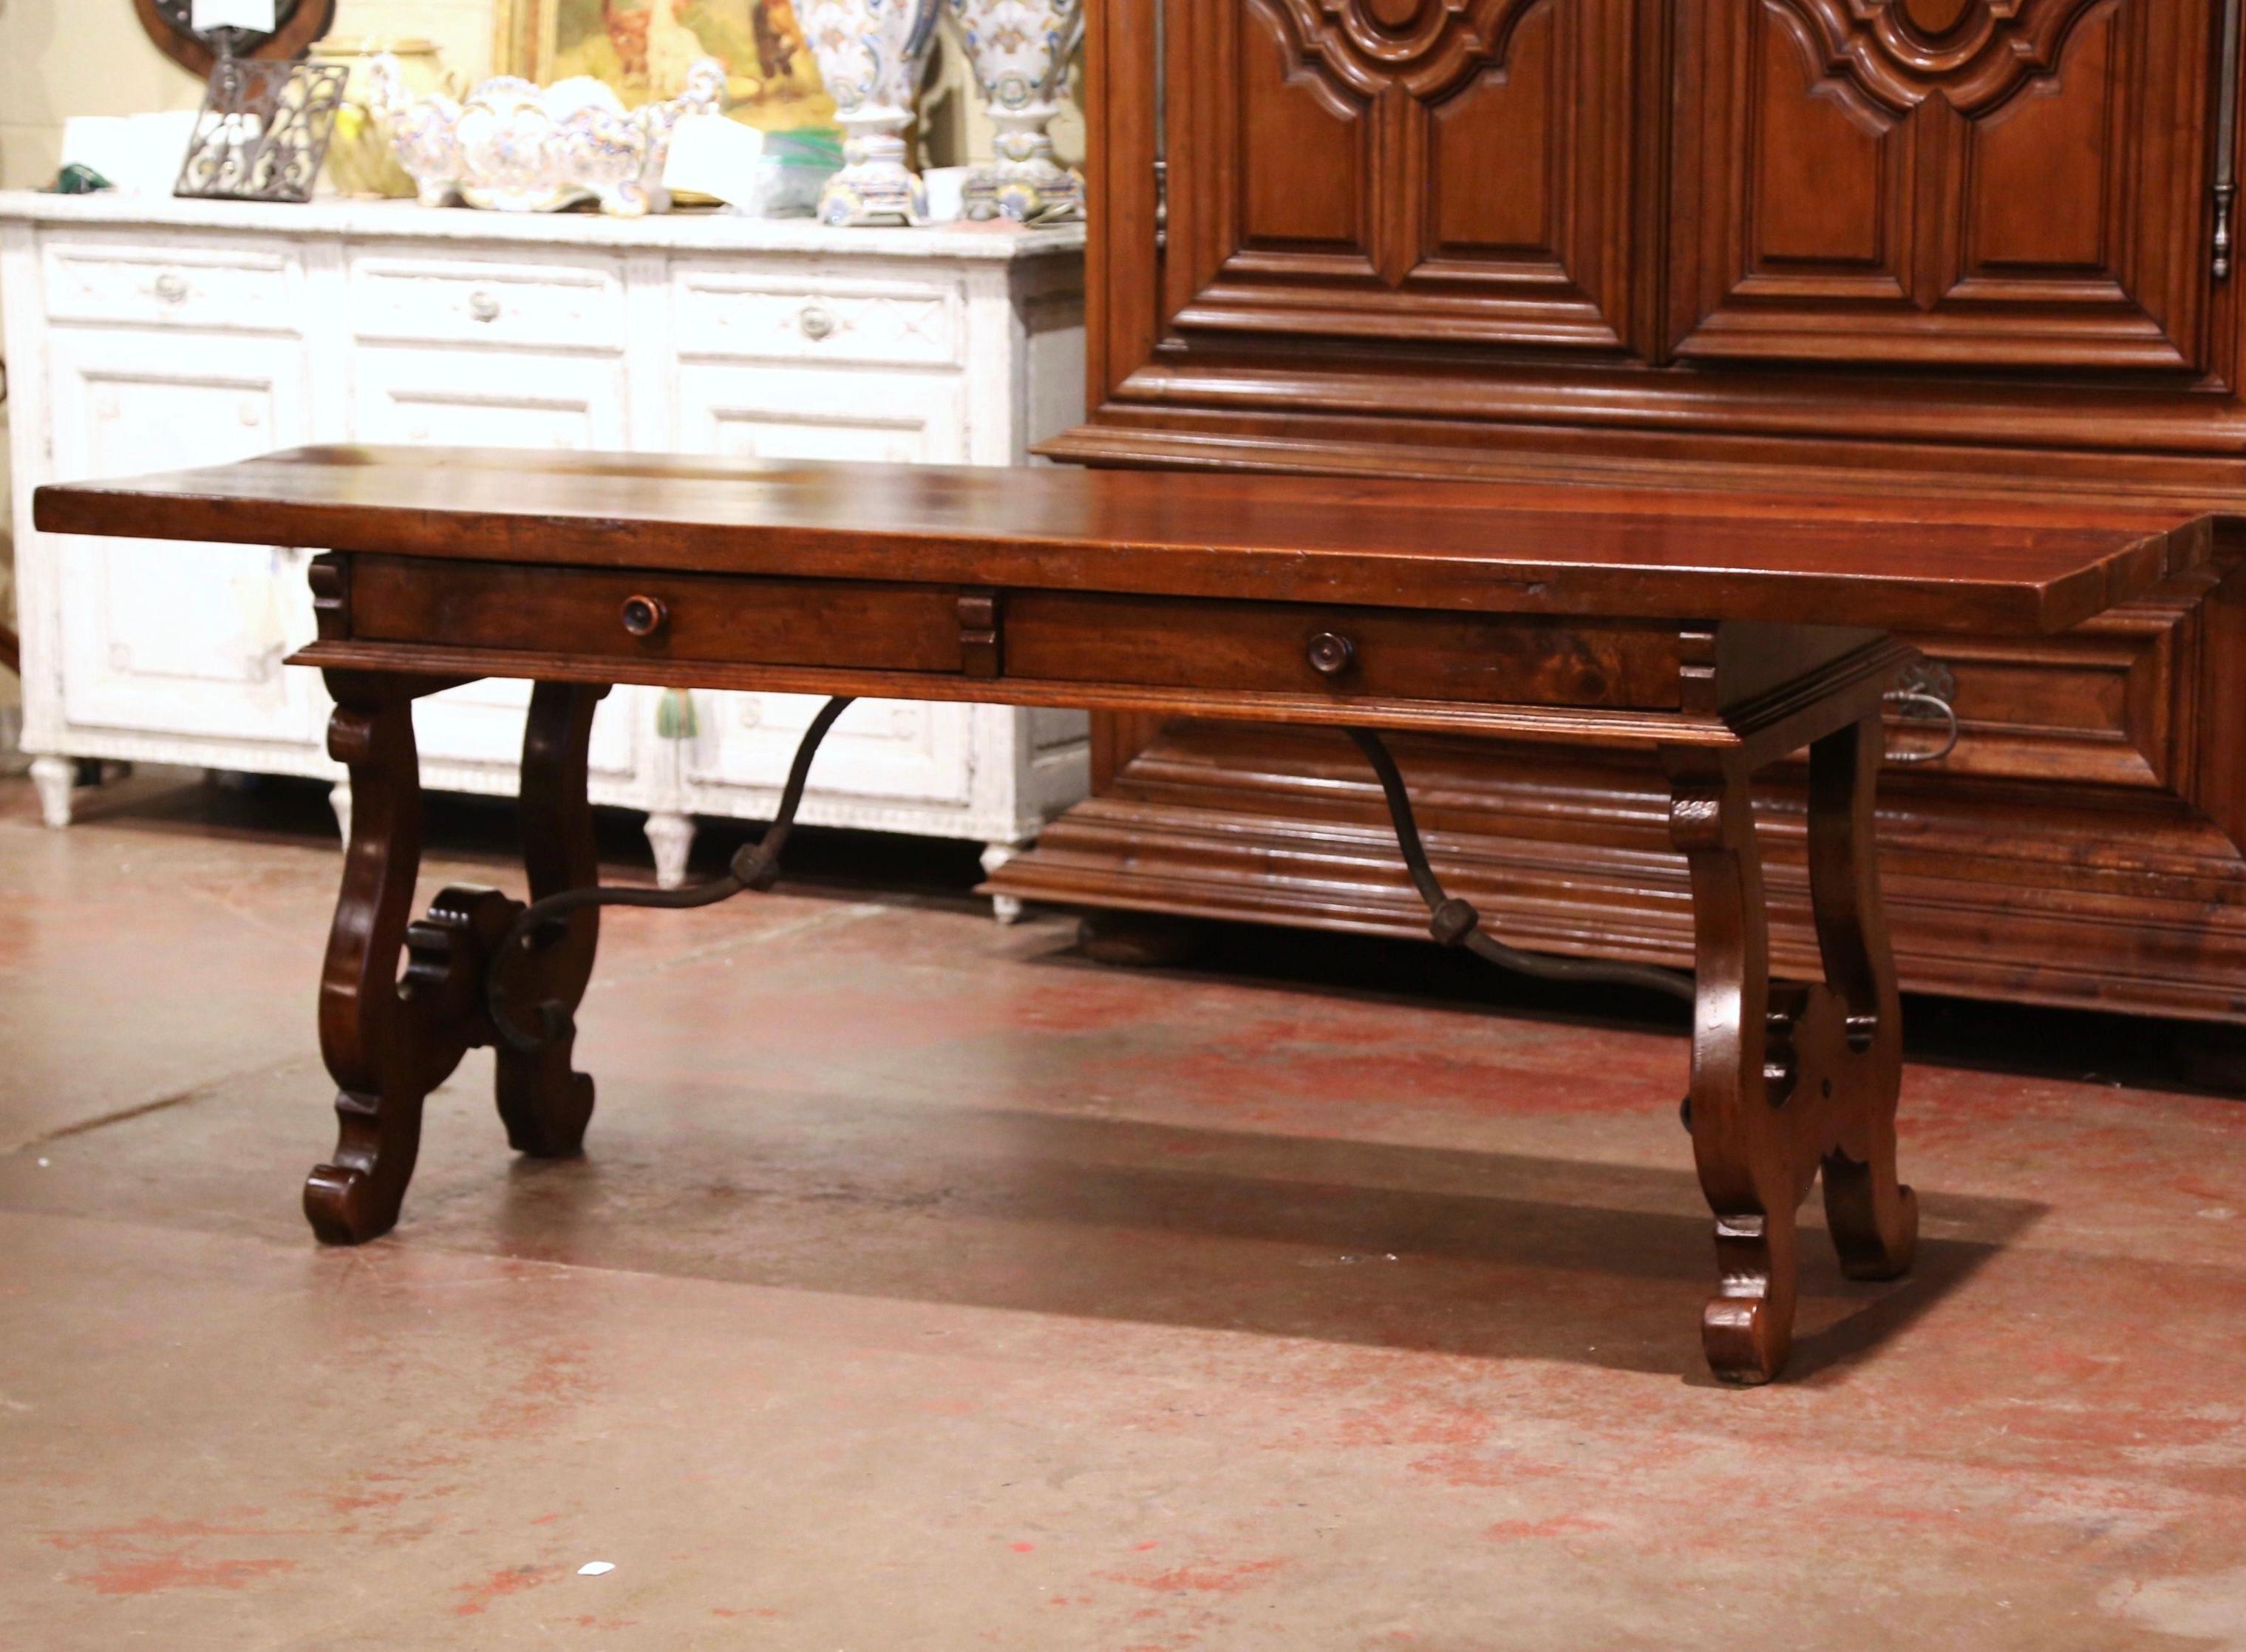 Patinated Mid-19th Century Spanish Carved Walnut and Iron Console Table Desk with Drawers